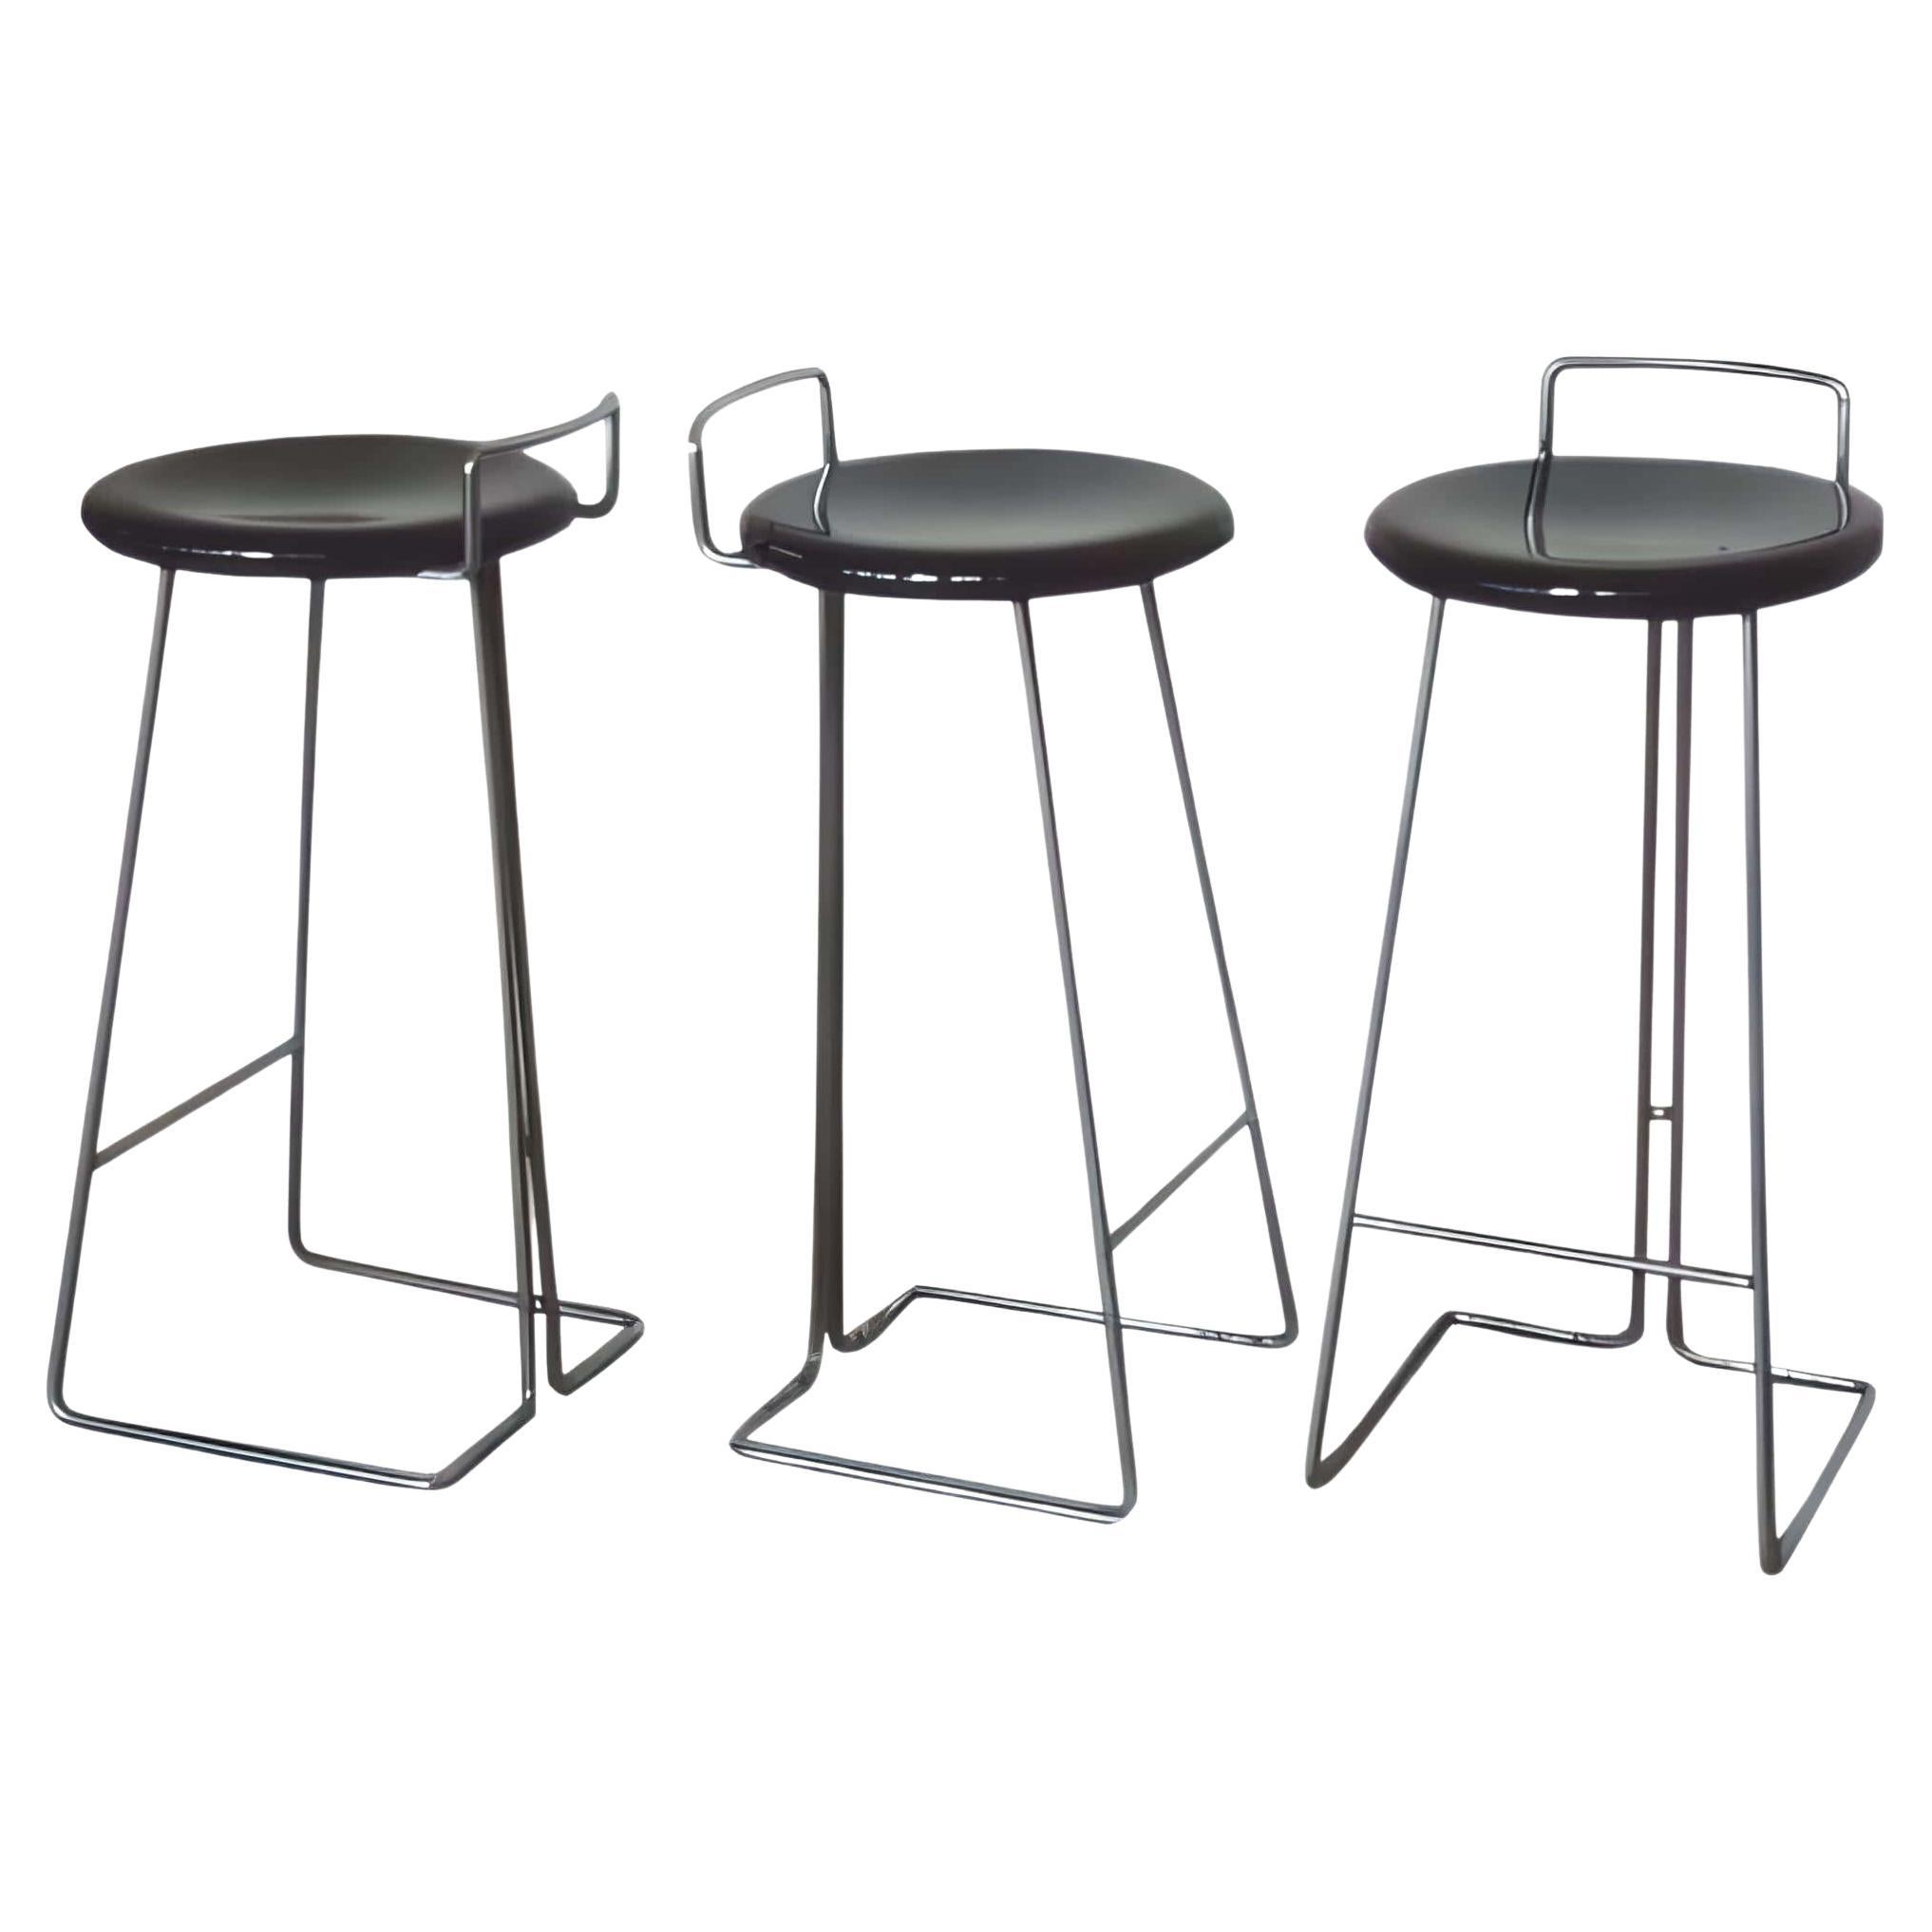 Set of 3 Vintage Stools by Coslin George for Dada, Italy 1970s For Sale